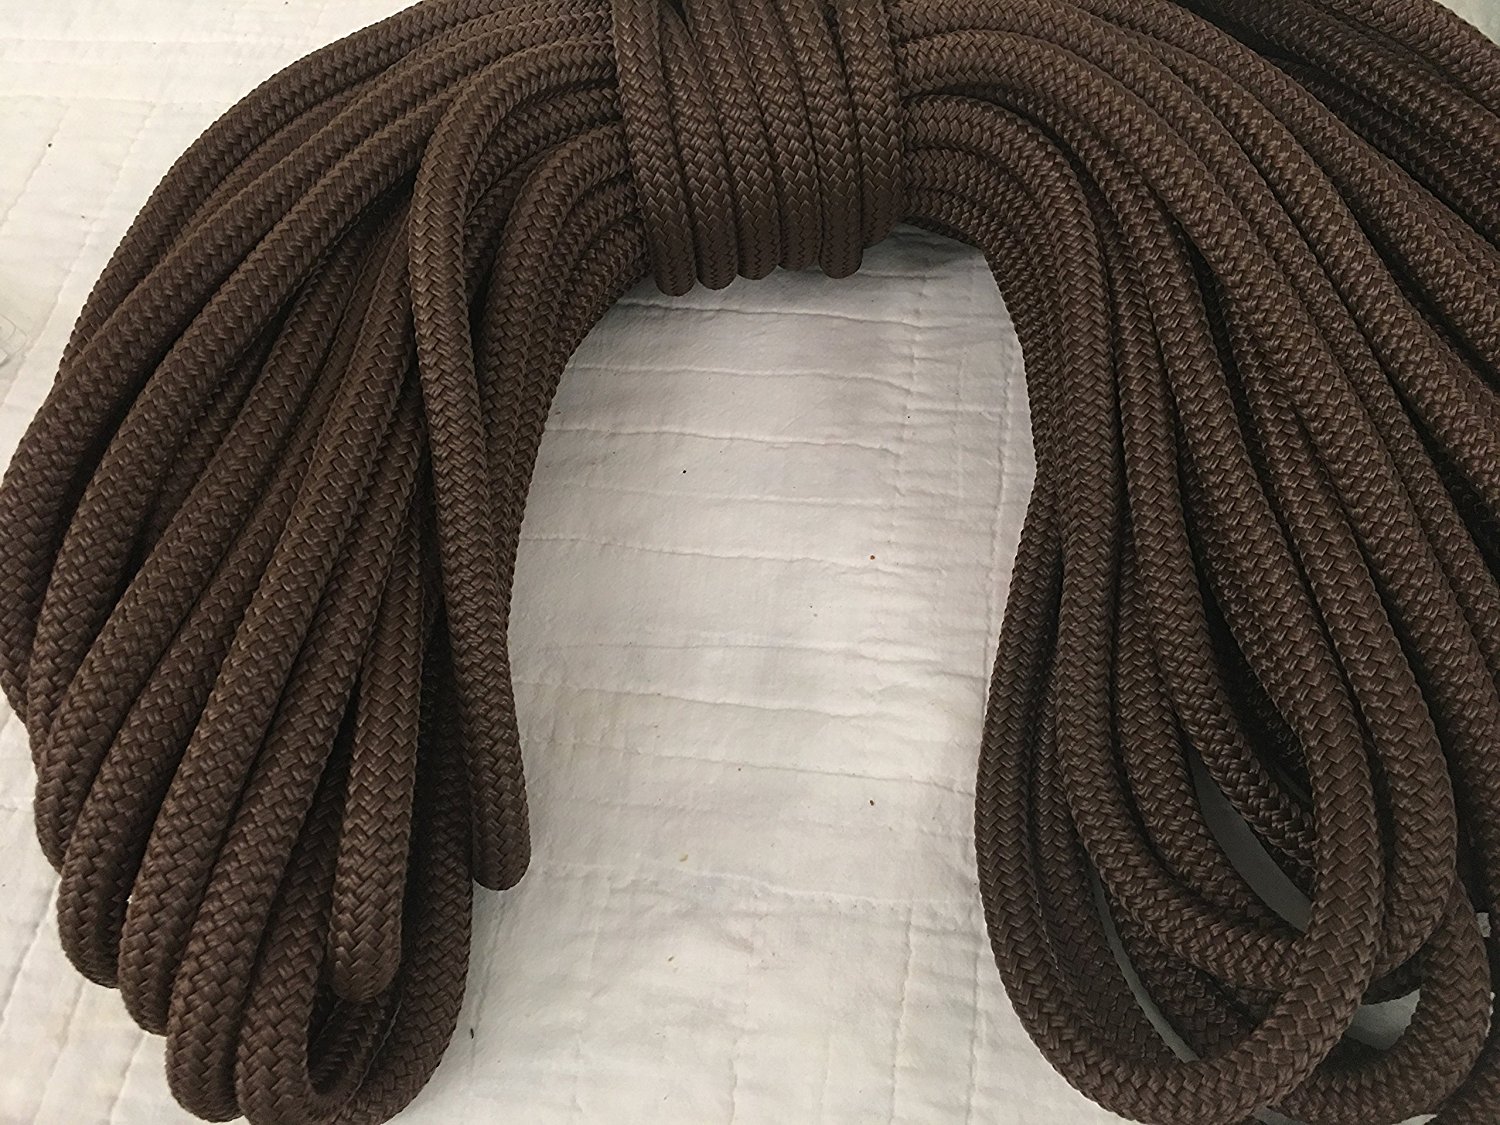 5/8"x16 feet double braid polyester brown reins leads dock line mooring winch 